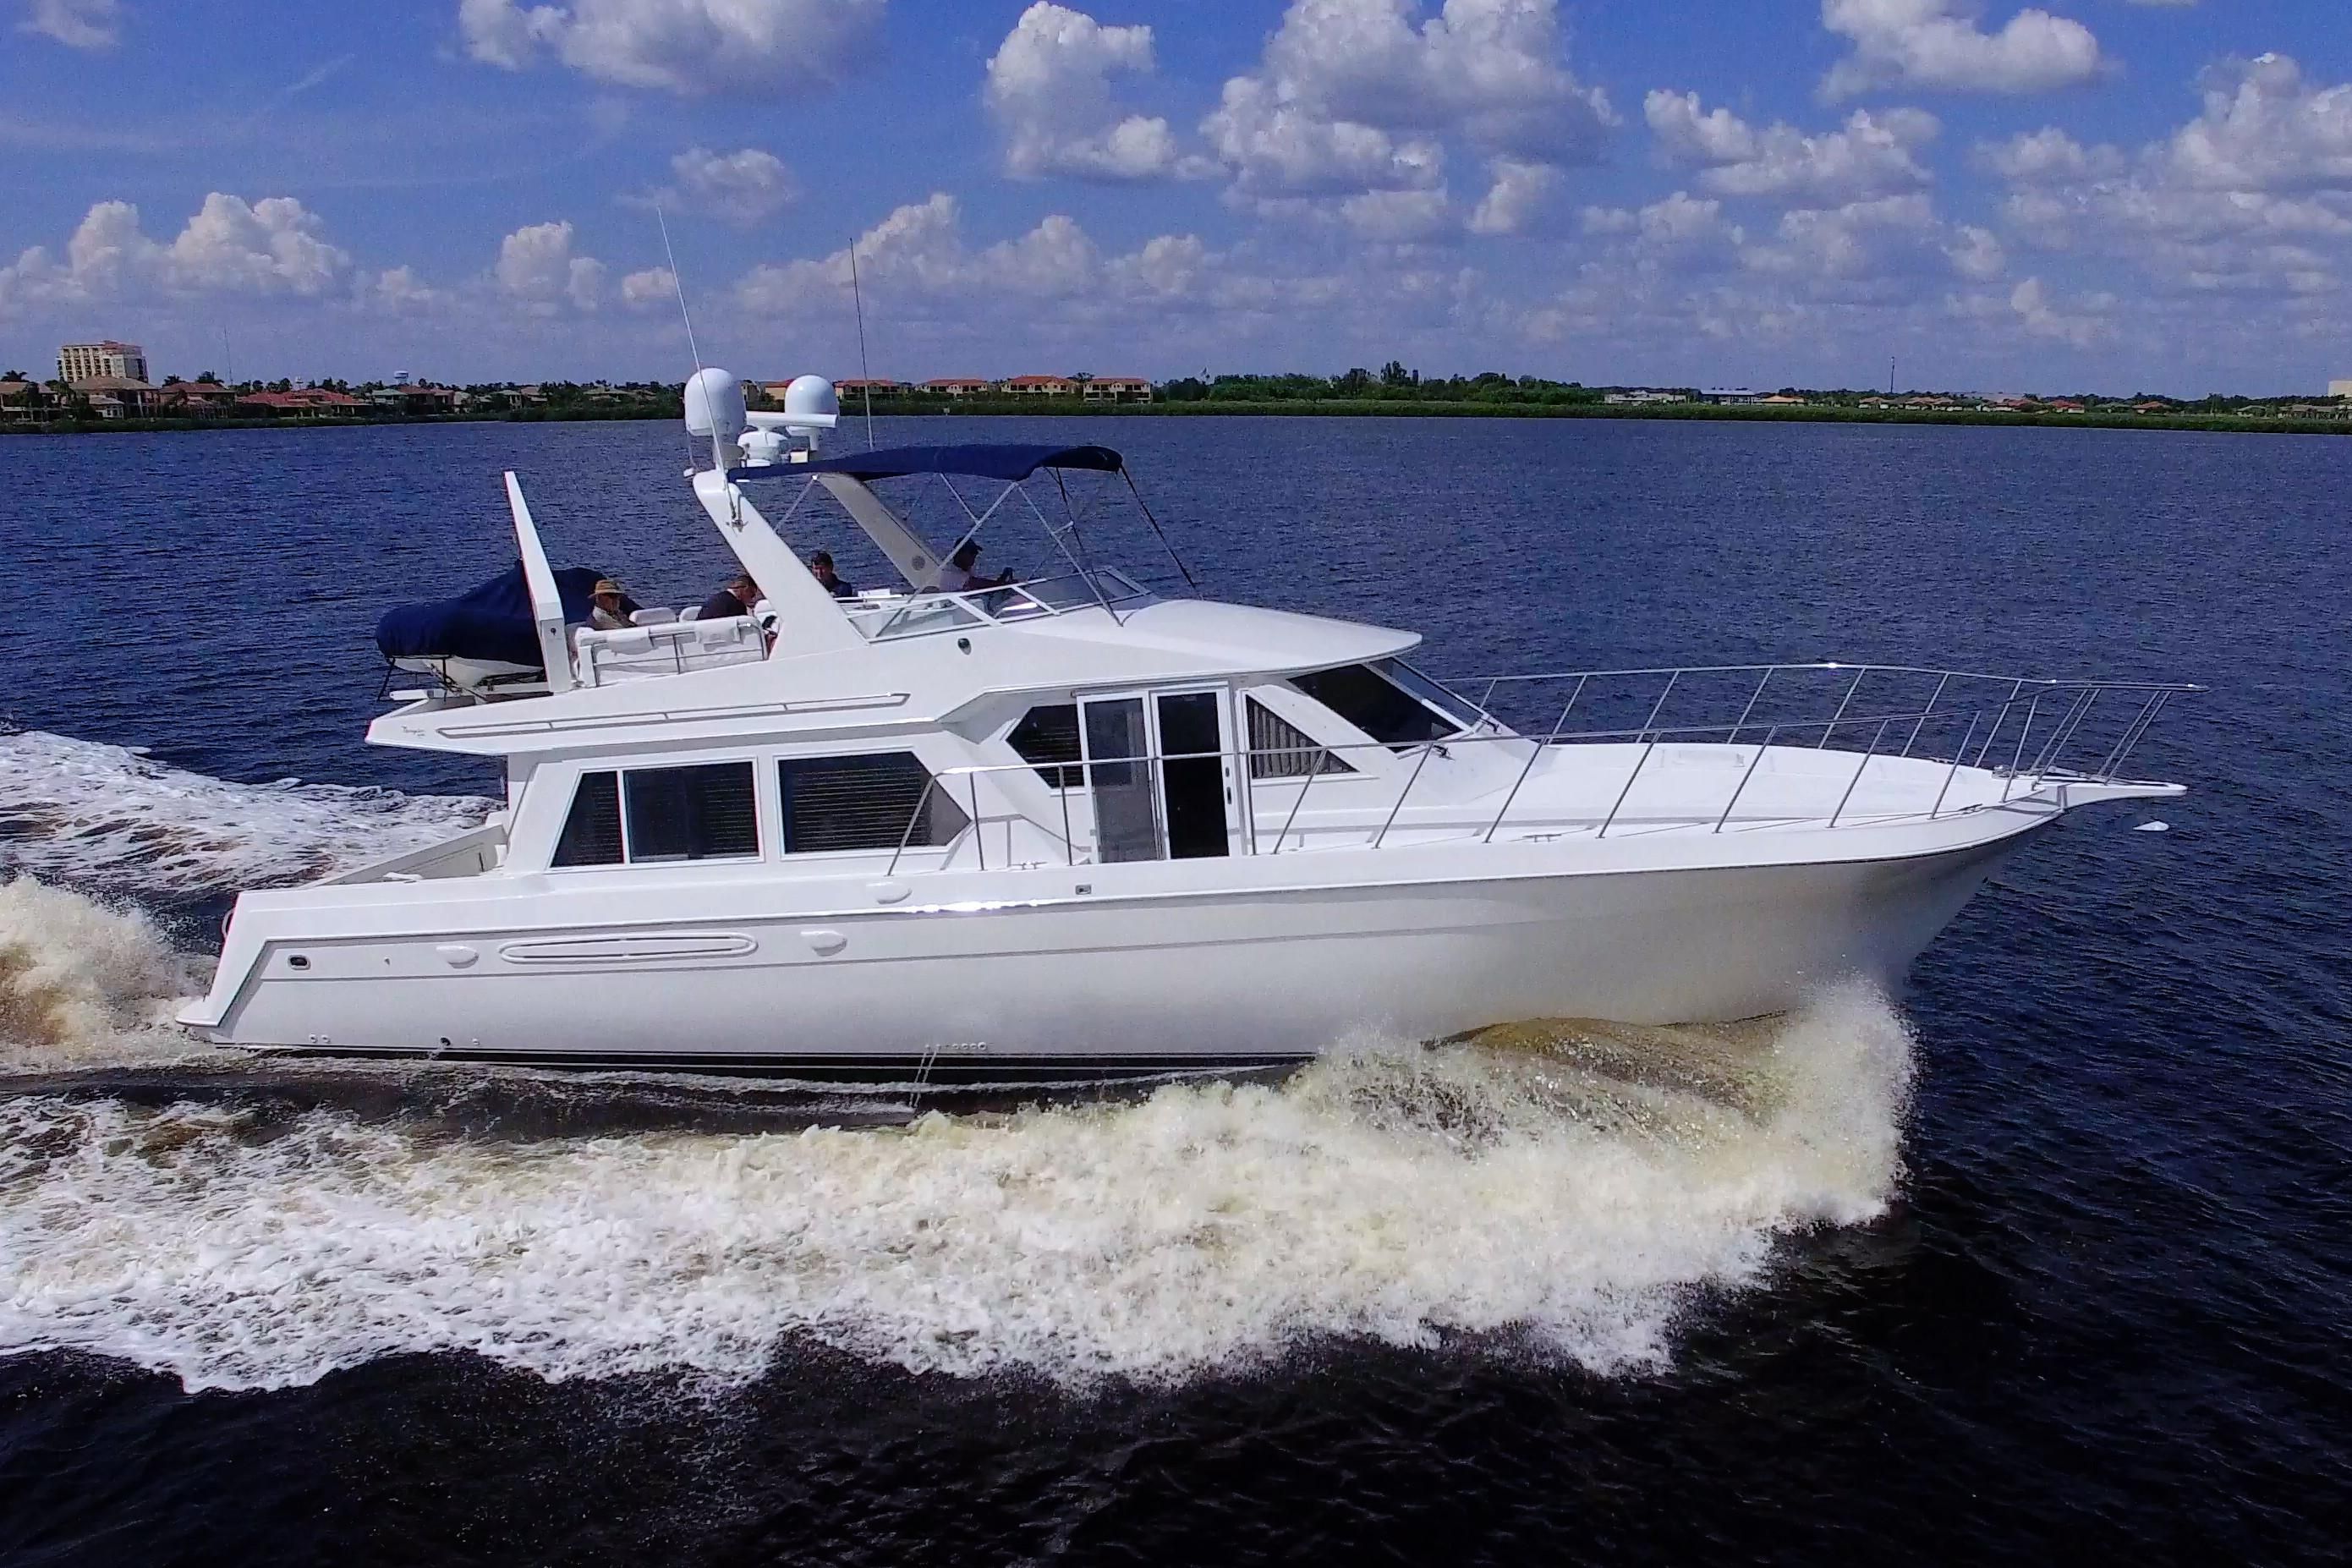 56 ft cruiser yacht for sale